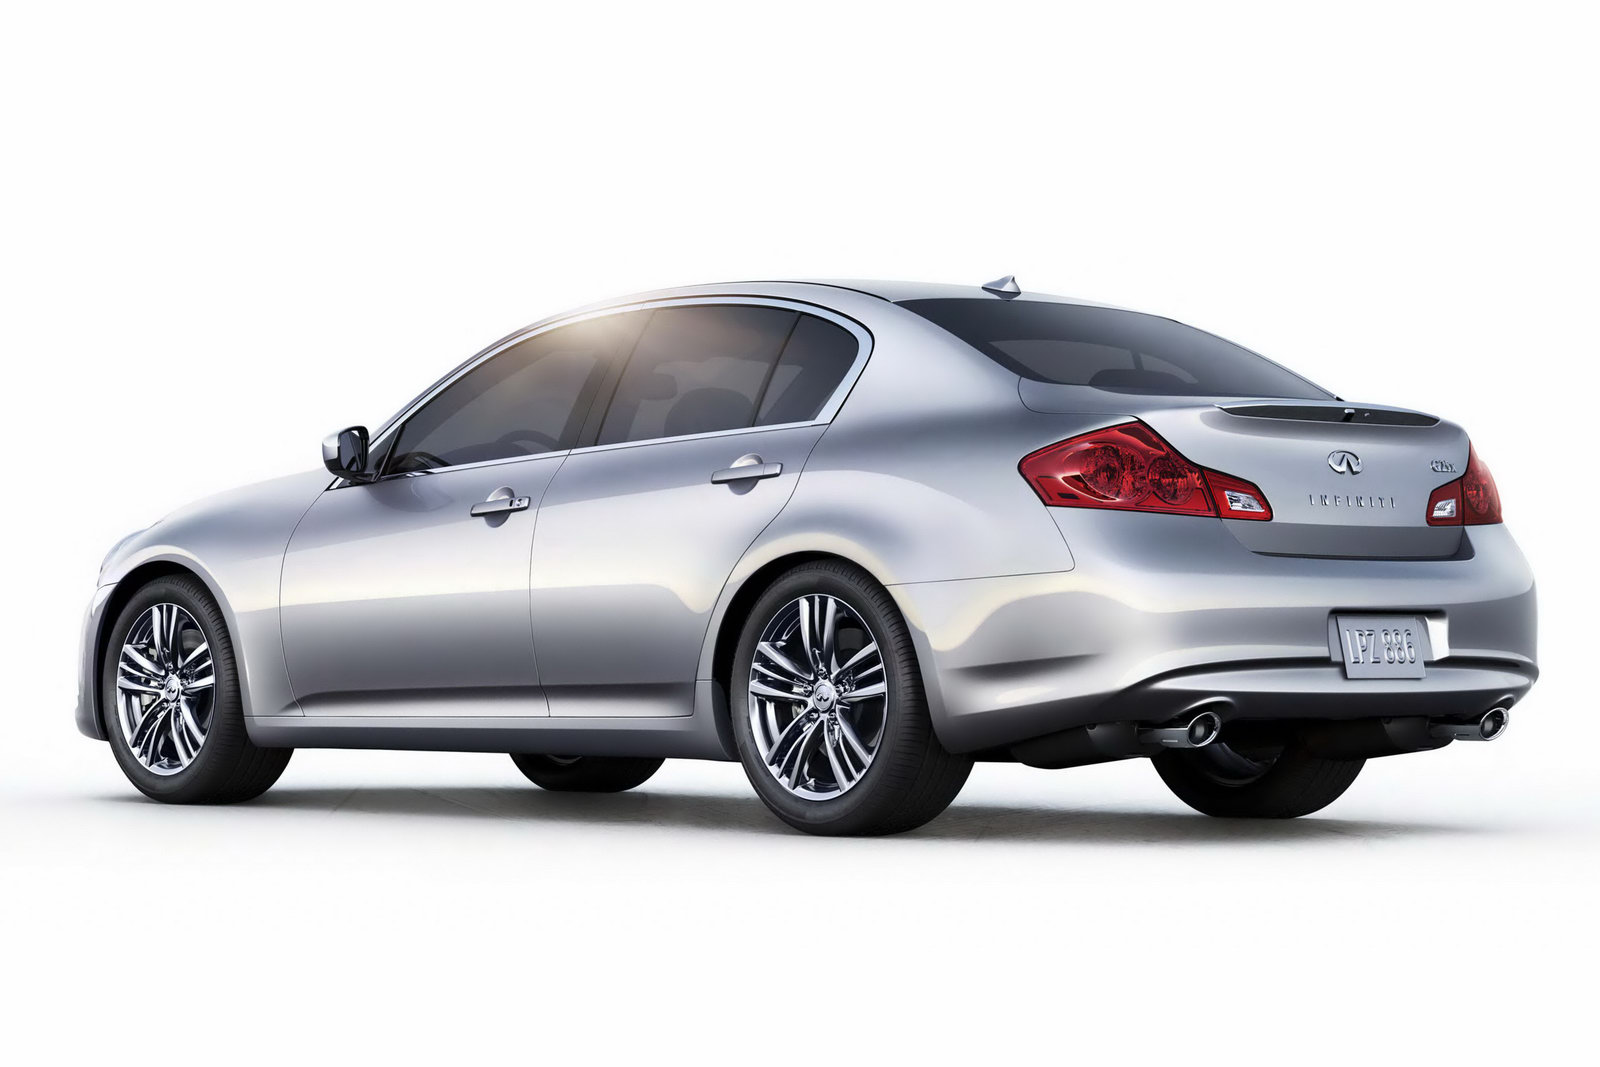 New Infiniti G25 with 218HP 2.5L V6, Priced from $30,950 | Carscoops